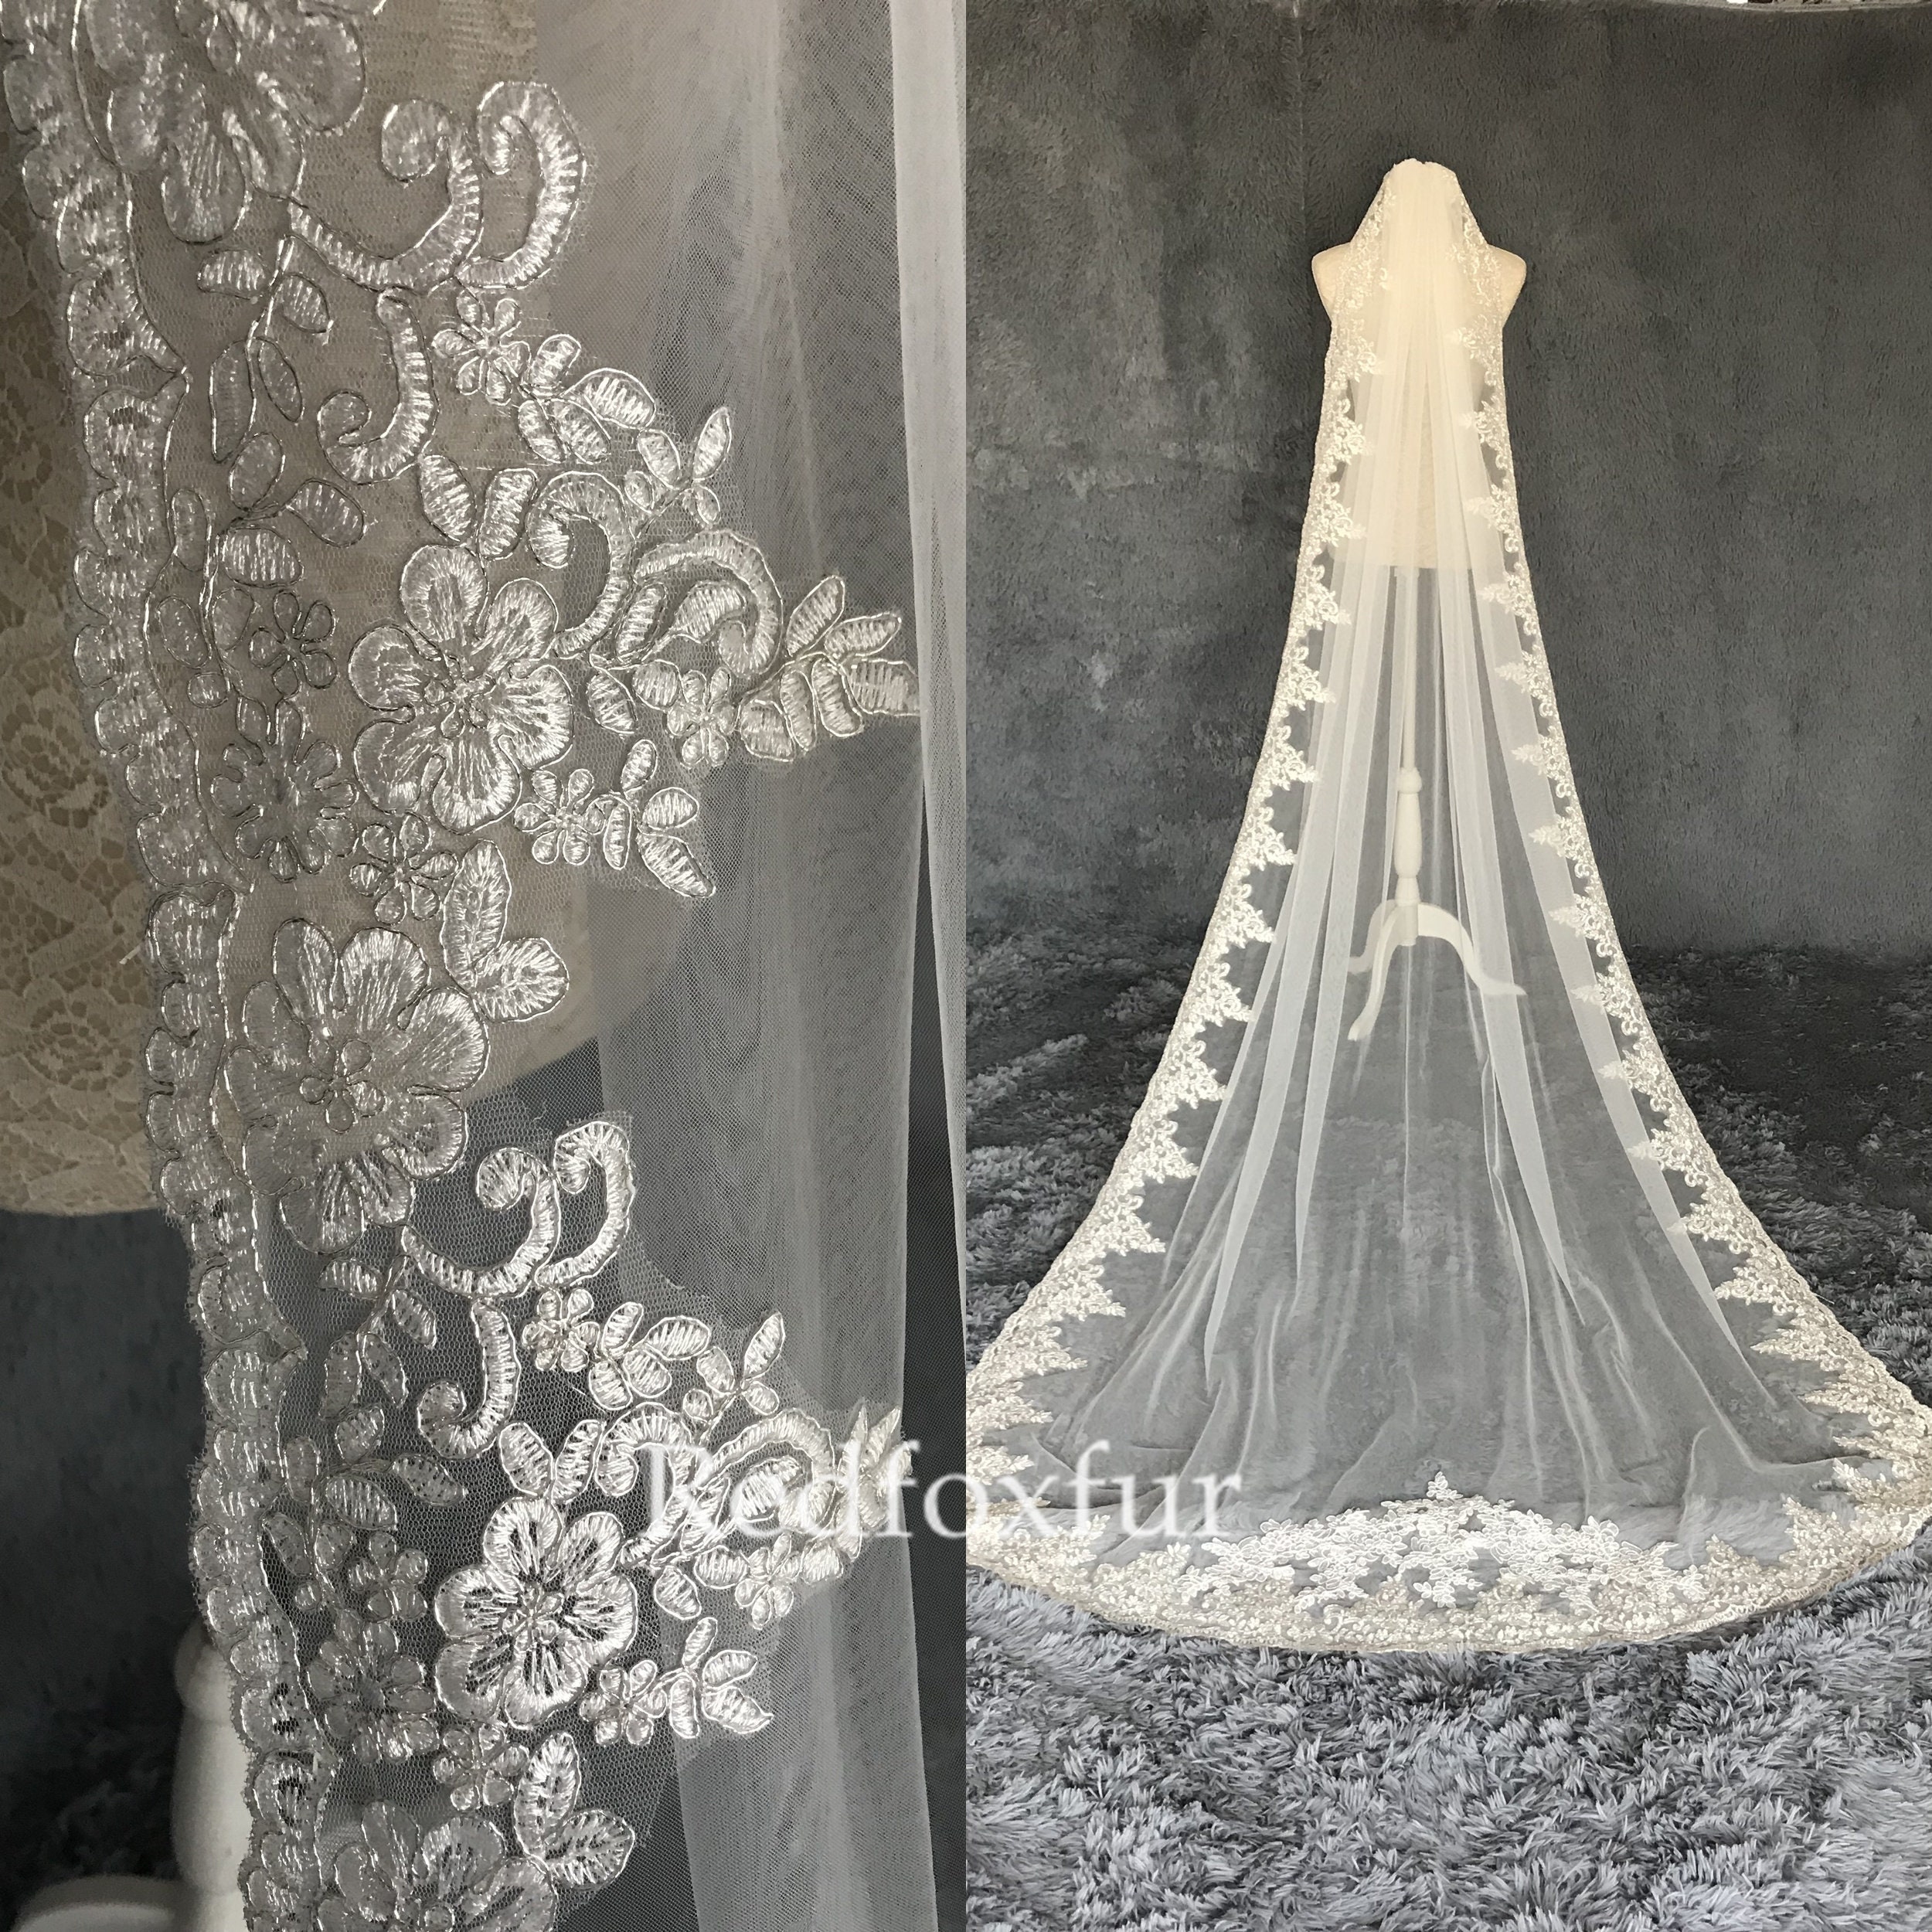 Simple Lace veil118 inches Cathedral veilWedding Lace | Etsy